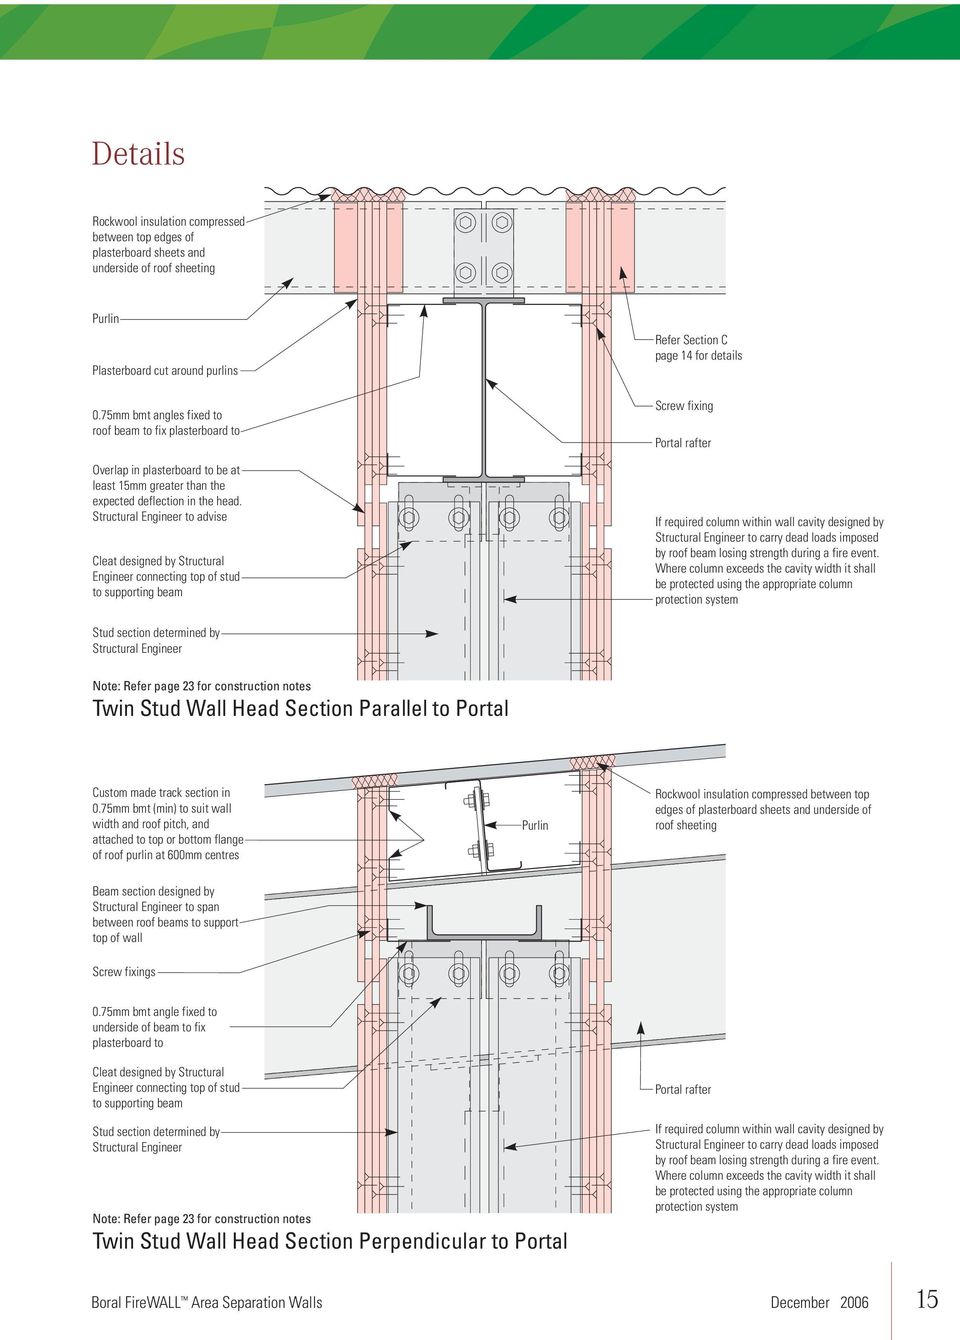 Structural to advise Cleat designed by Structural connecting top of stud to supporting beam Refer Section C page 14 for details Screw fixing Portal rafter If required column within wall cavity